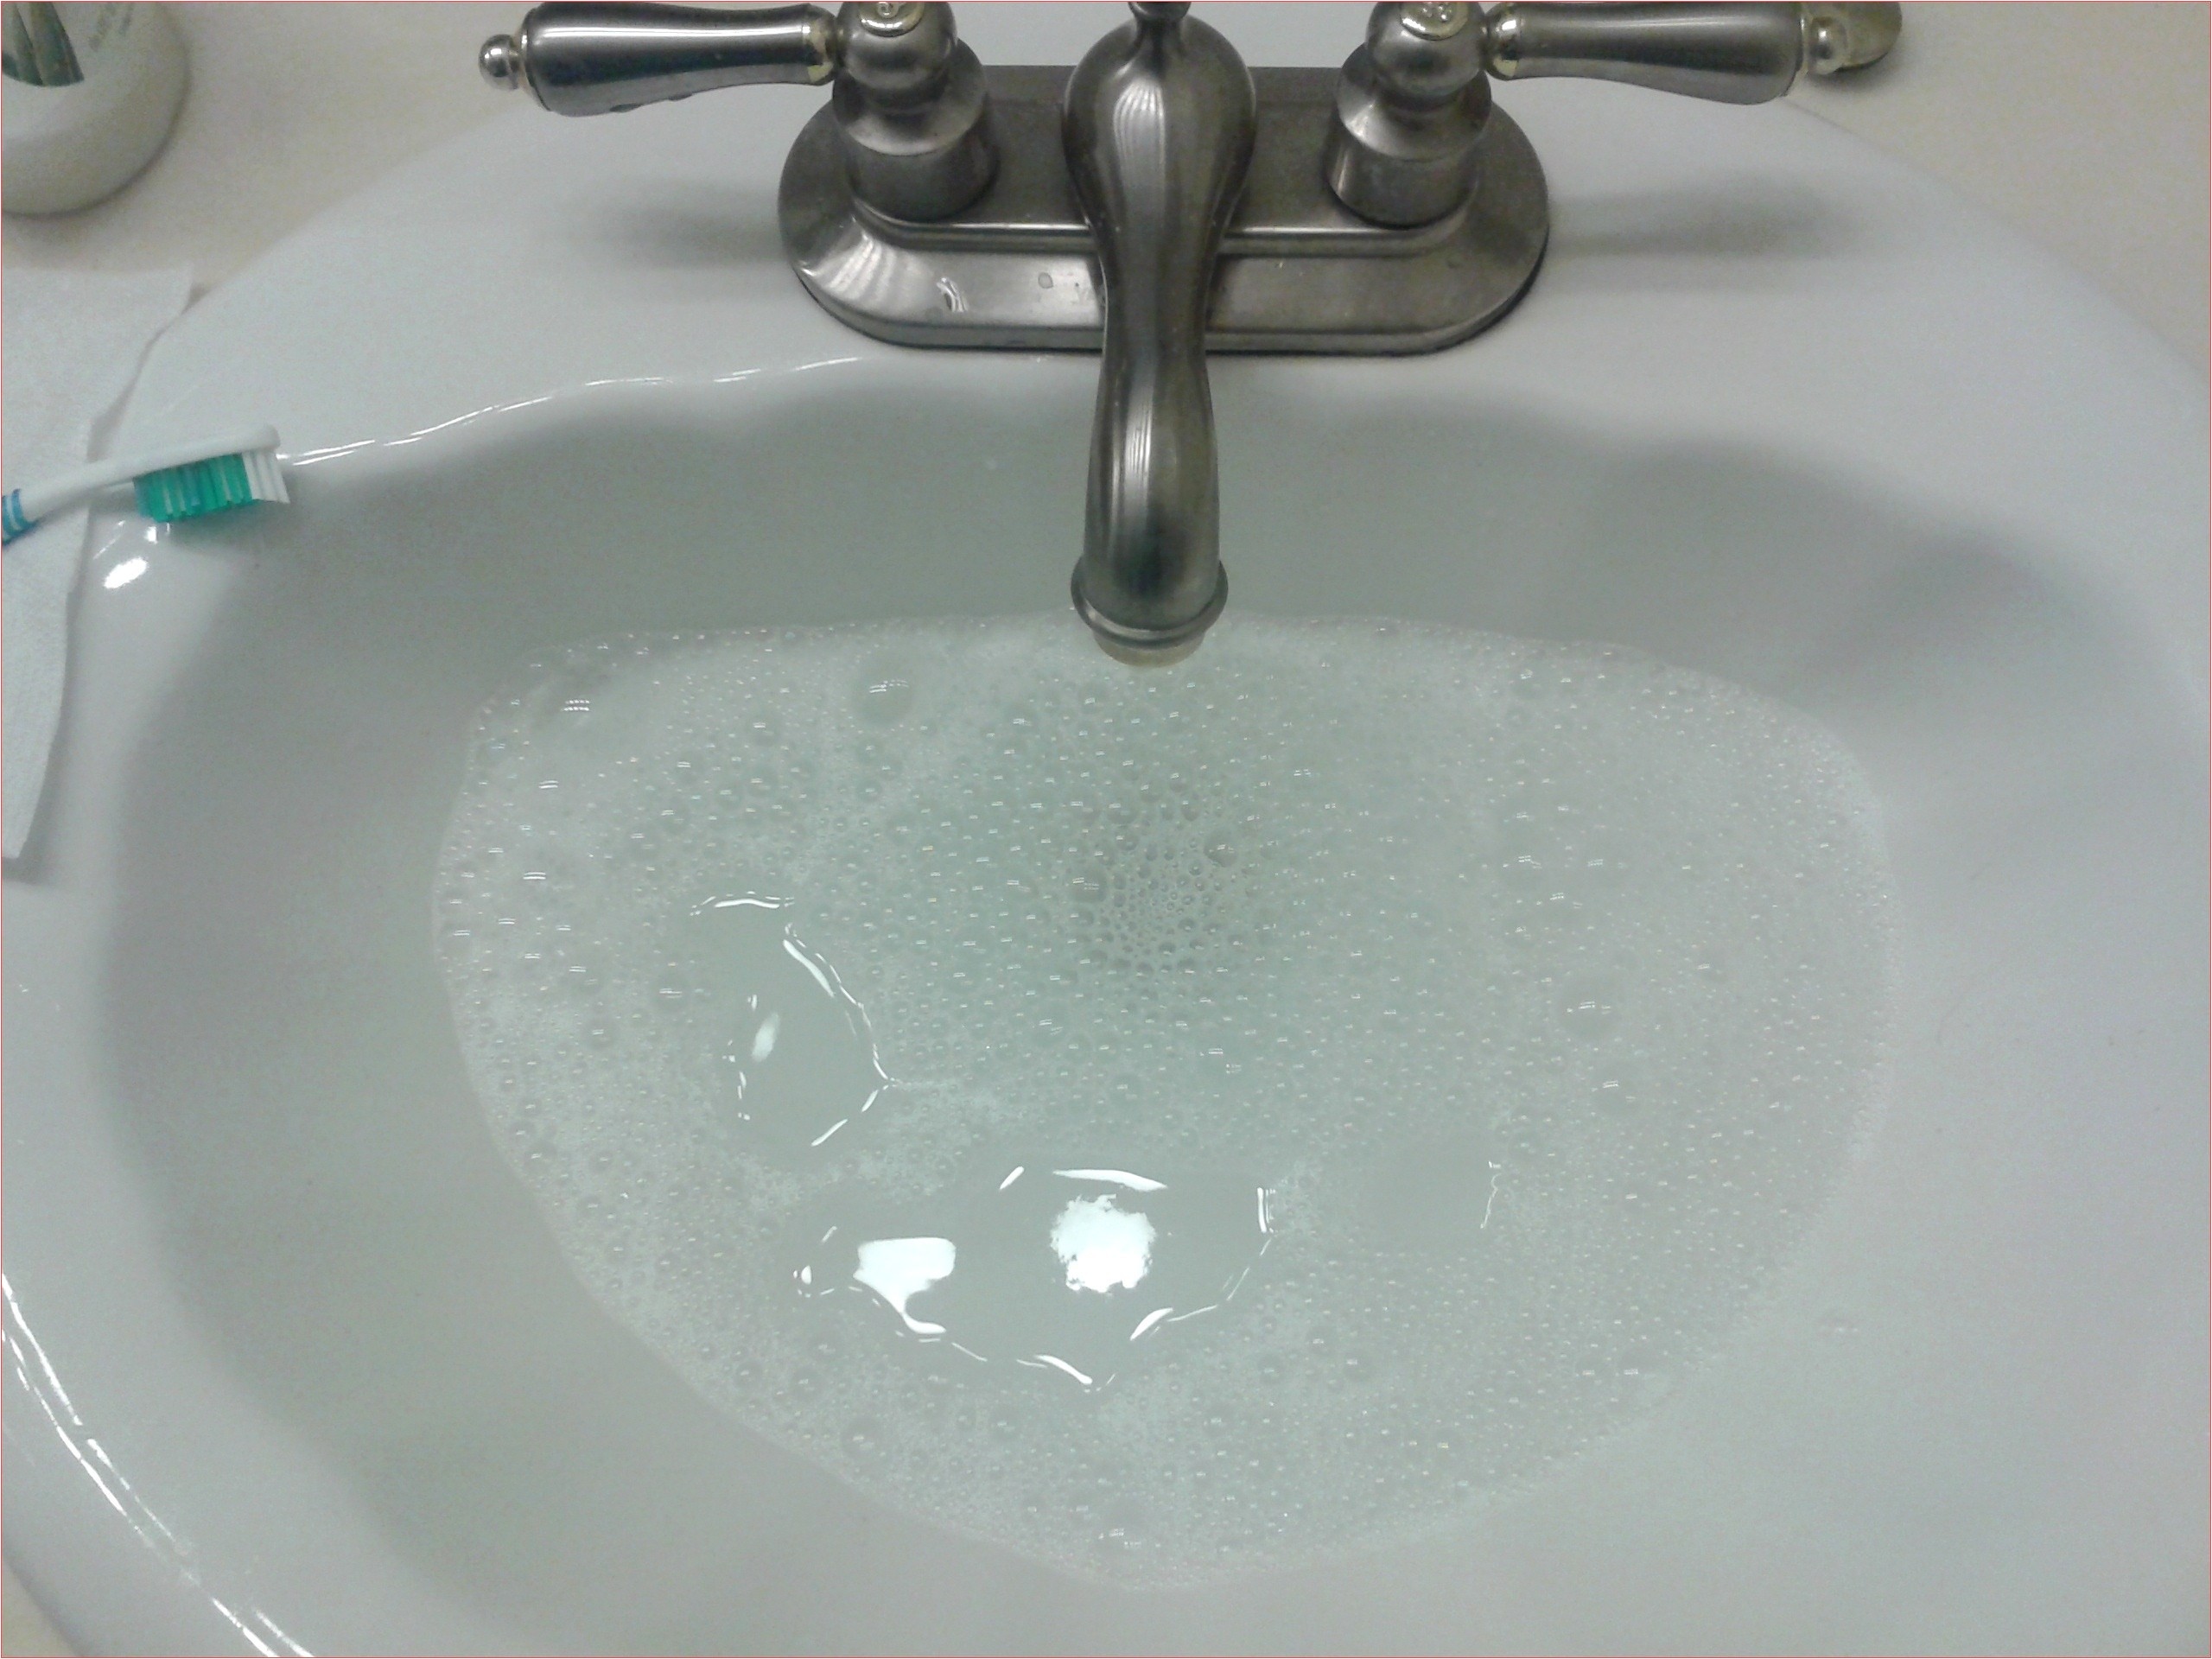 Best Way to Unclog A Shower Drain Clogged Tub Drain Lovely H Sink How to Fix A Clogged Bathroom Drain